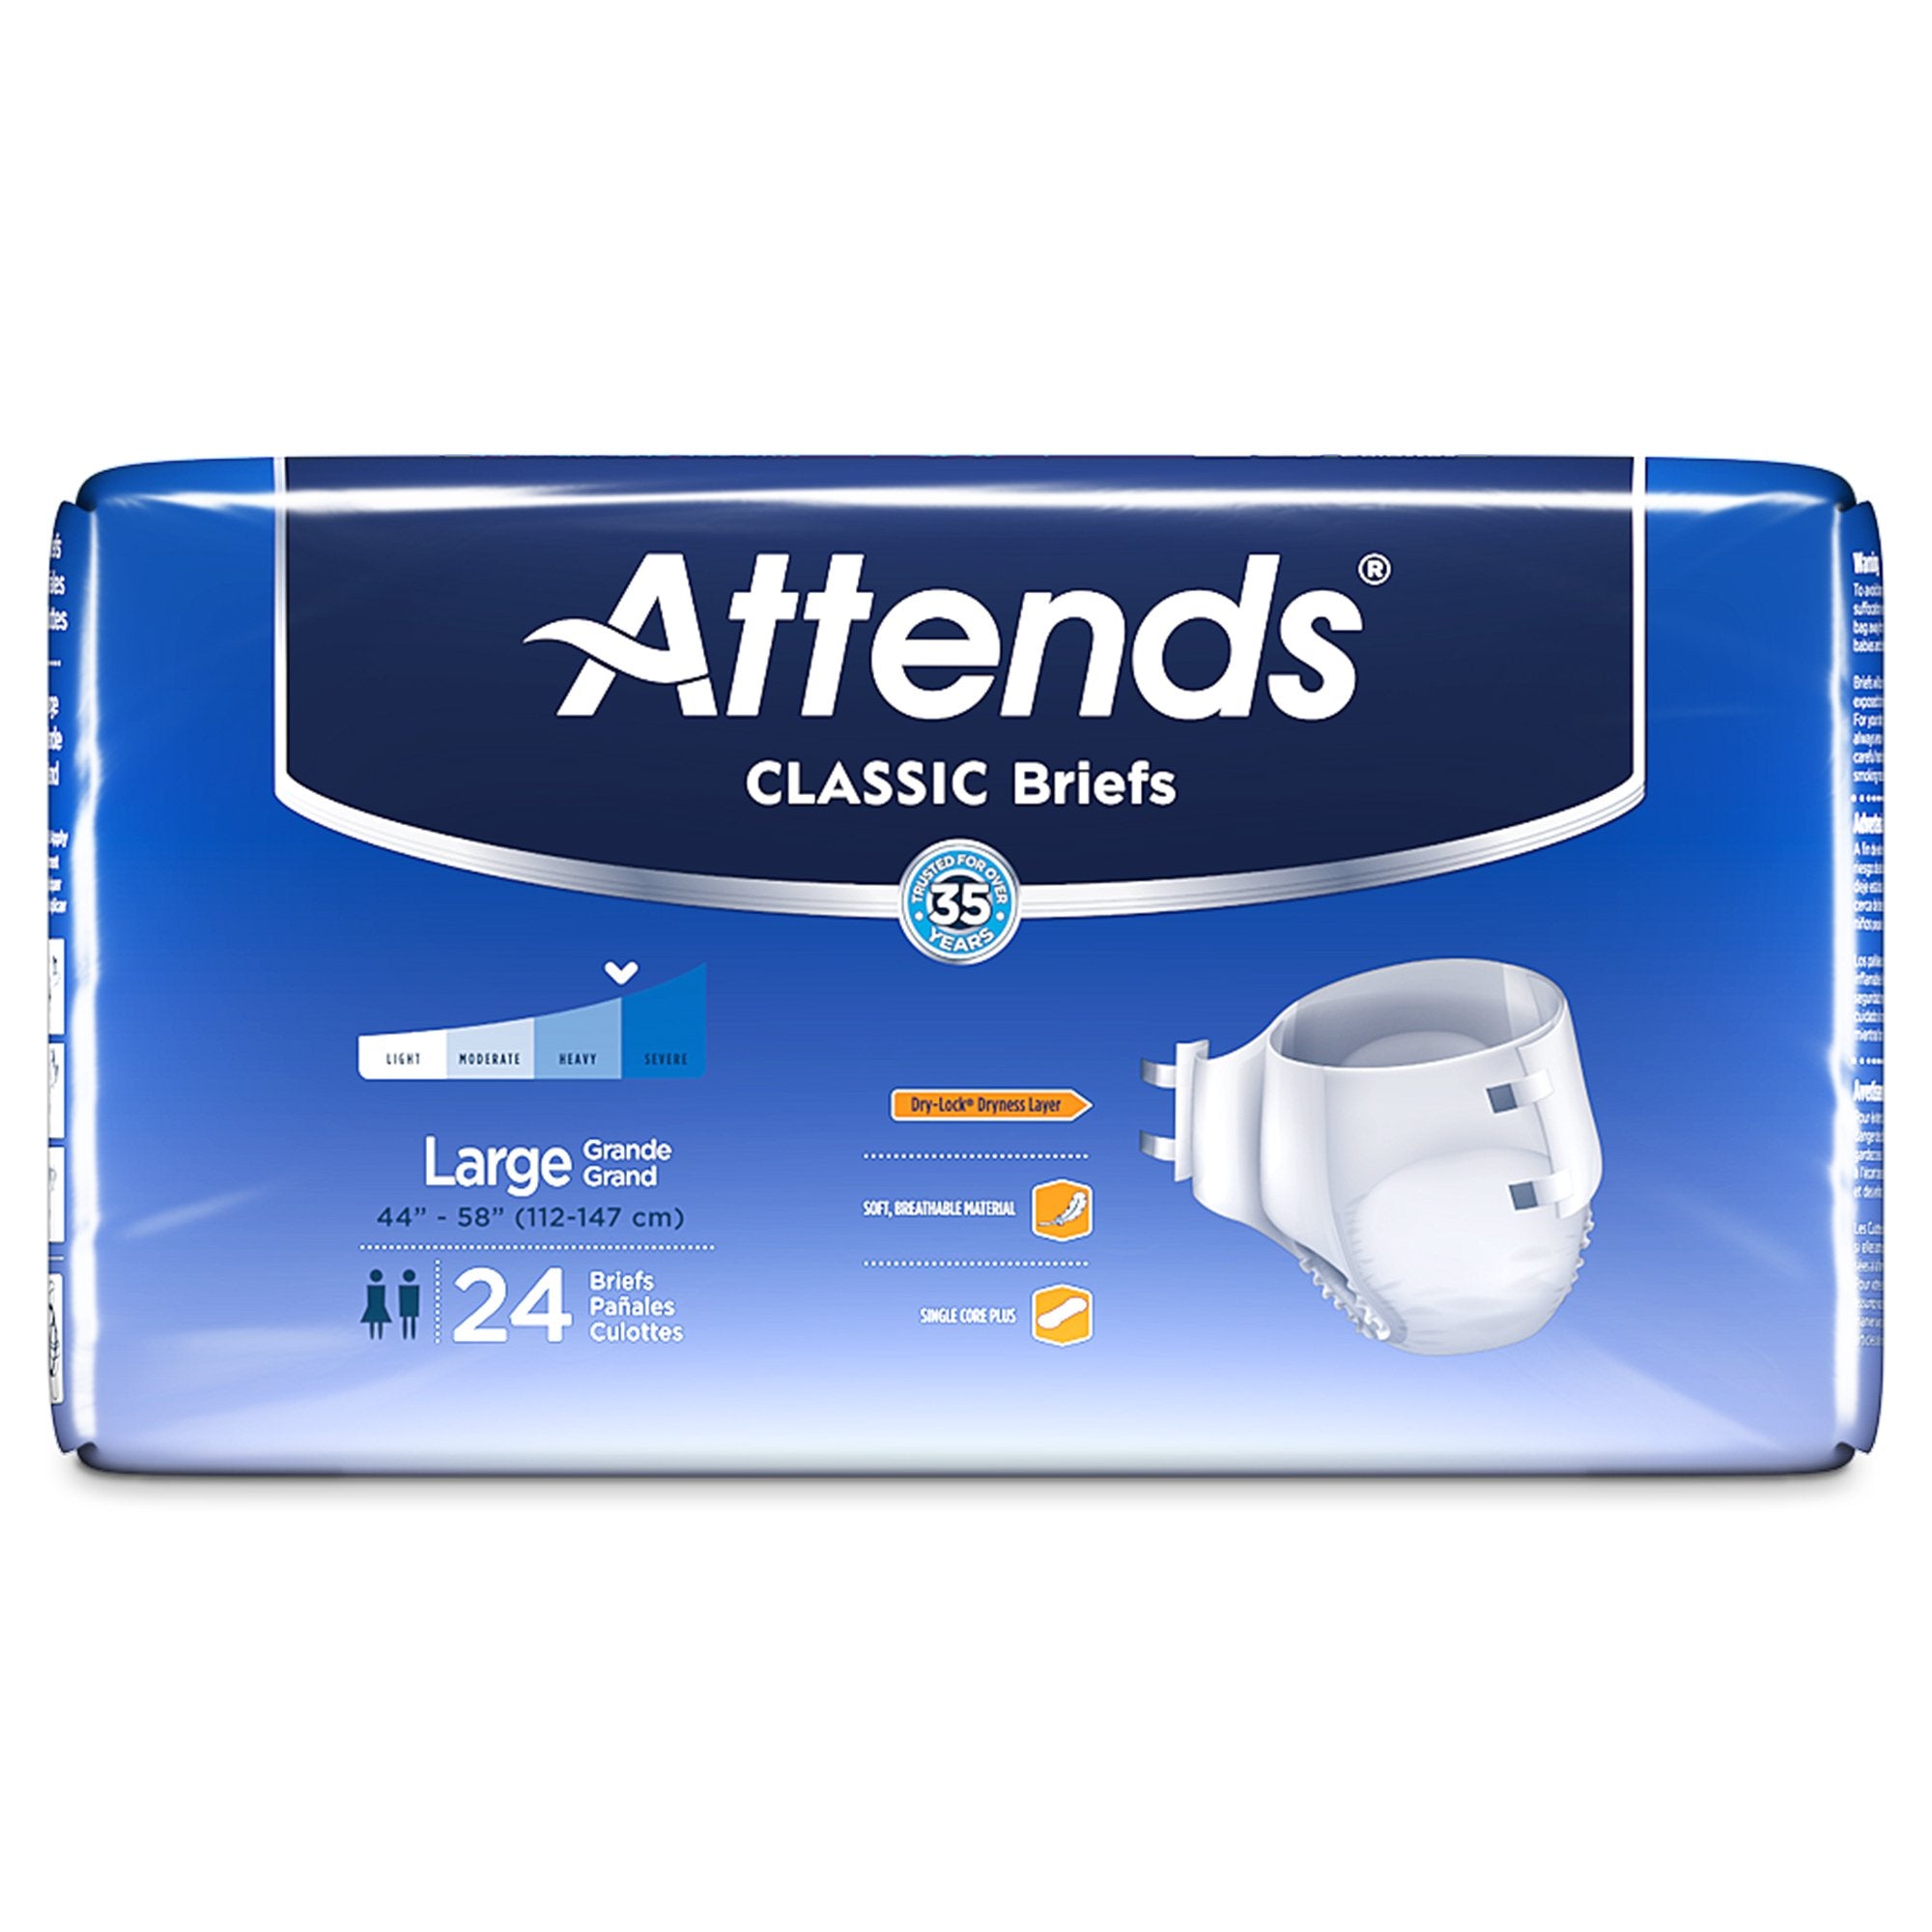 Unisex Adult Incontinence Brief Attends Classic Large Disposable Heavy Absorbency